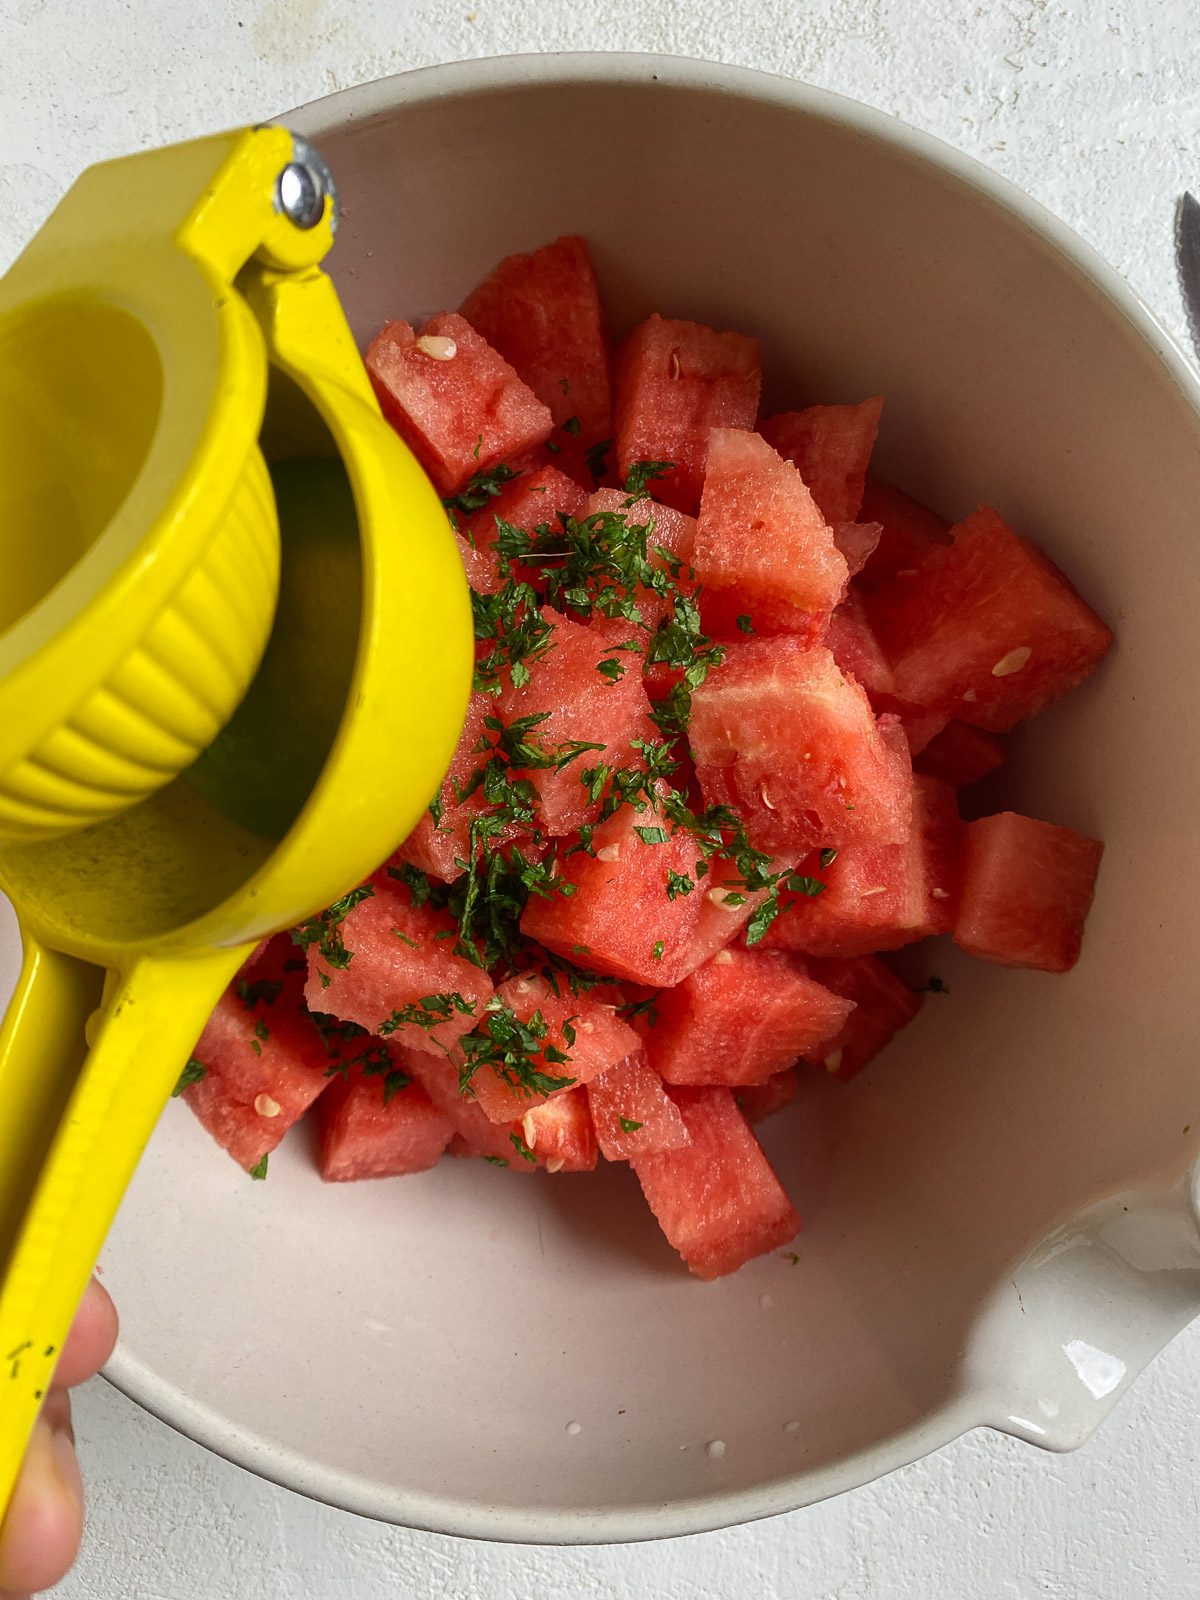 process of squeezing lime juice into bowl of watermelon